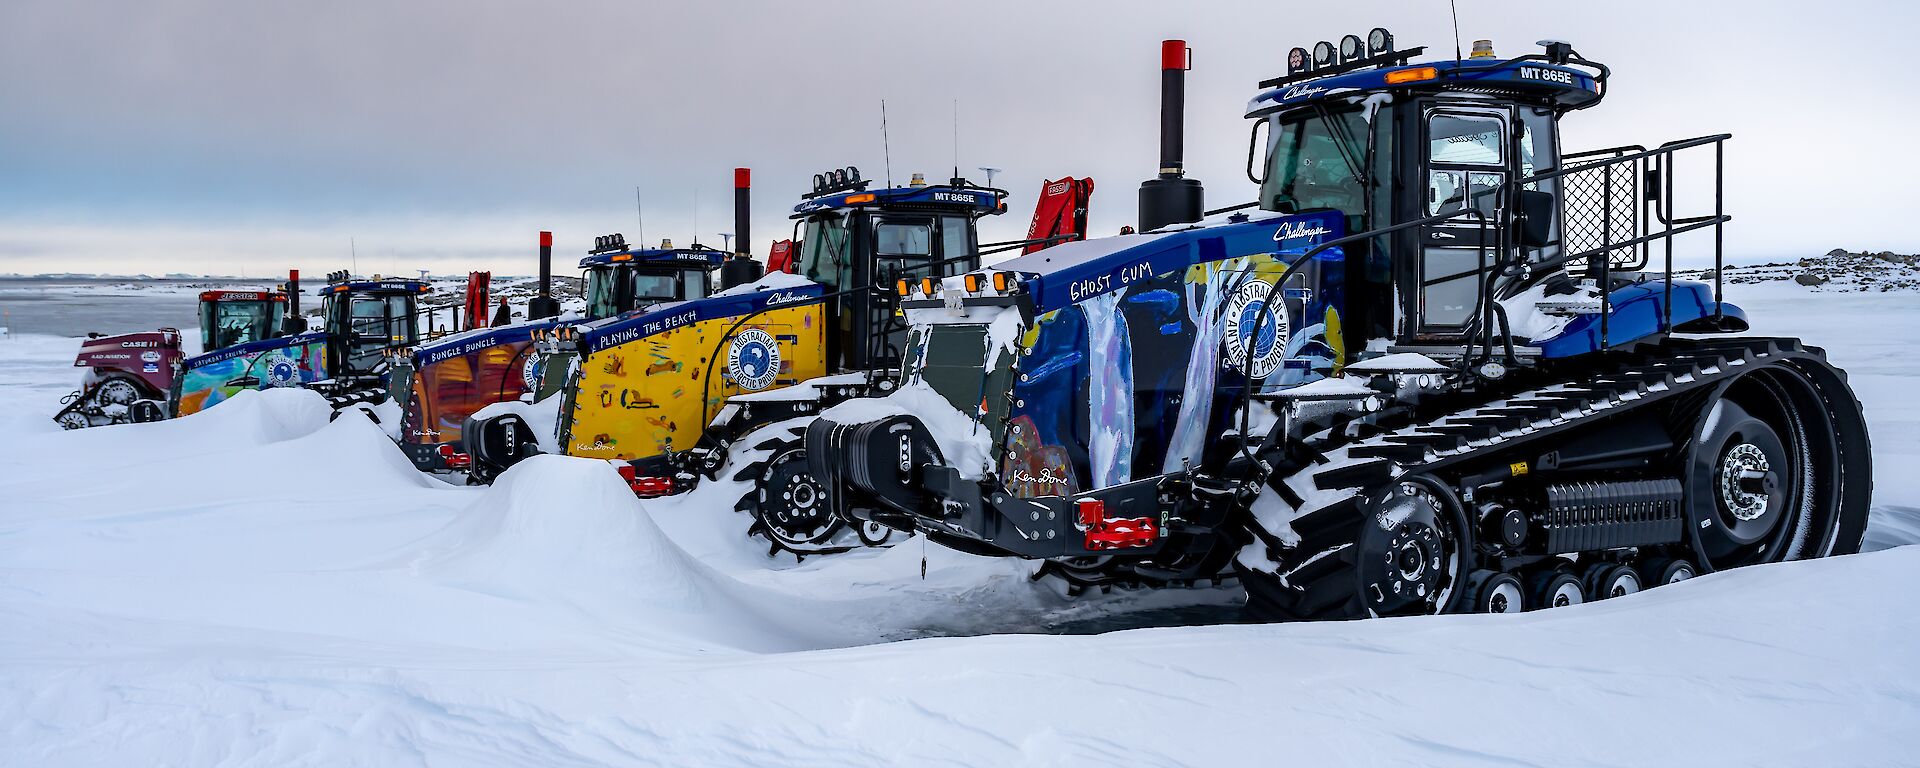 A row of tractors parked in the snow.